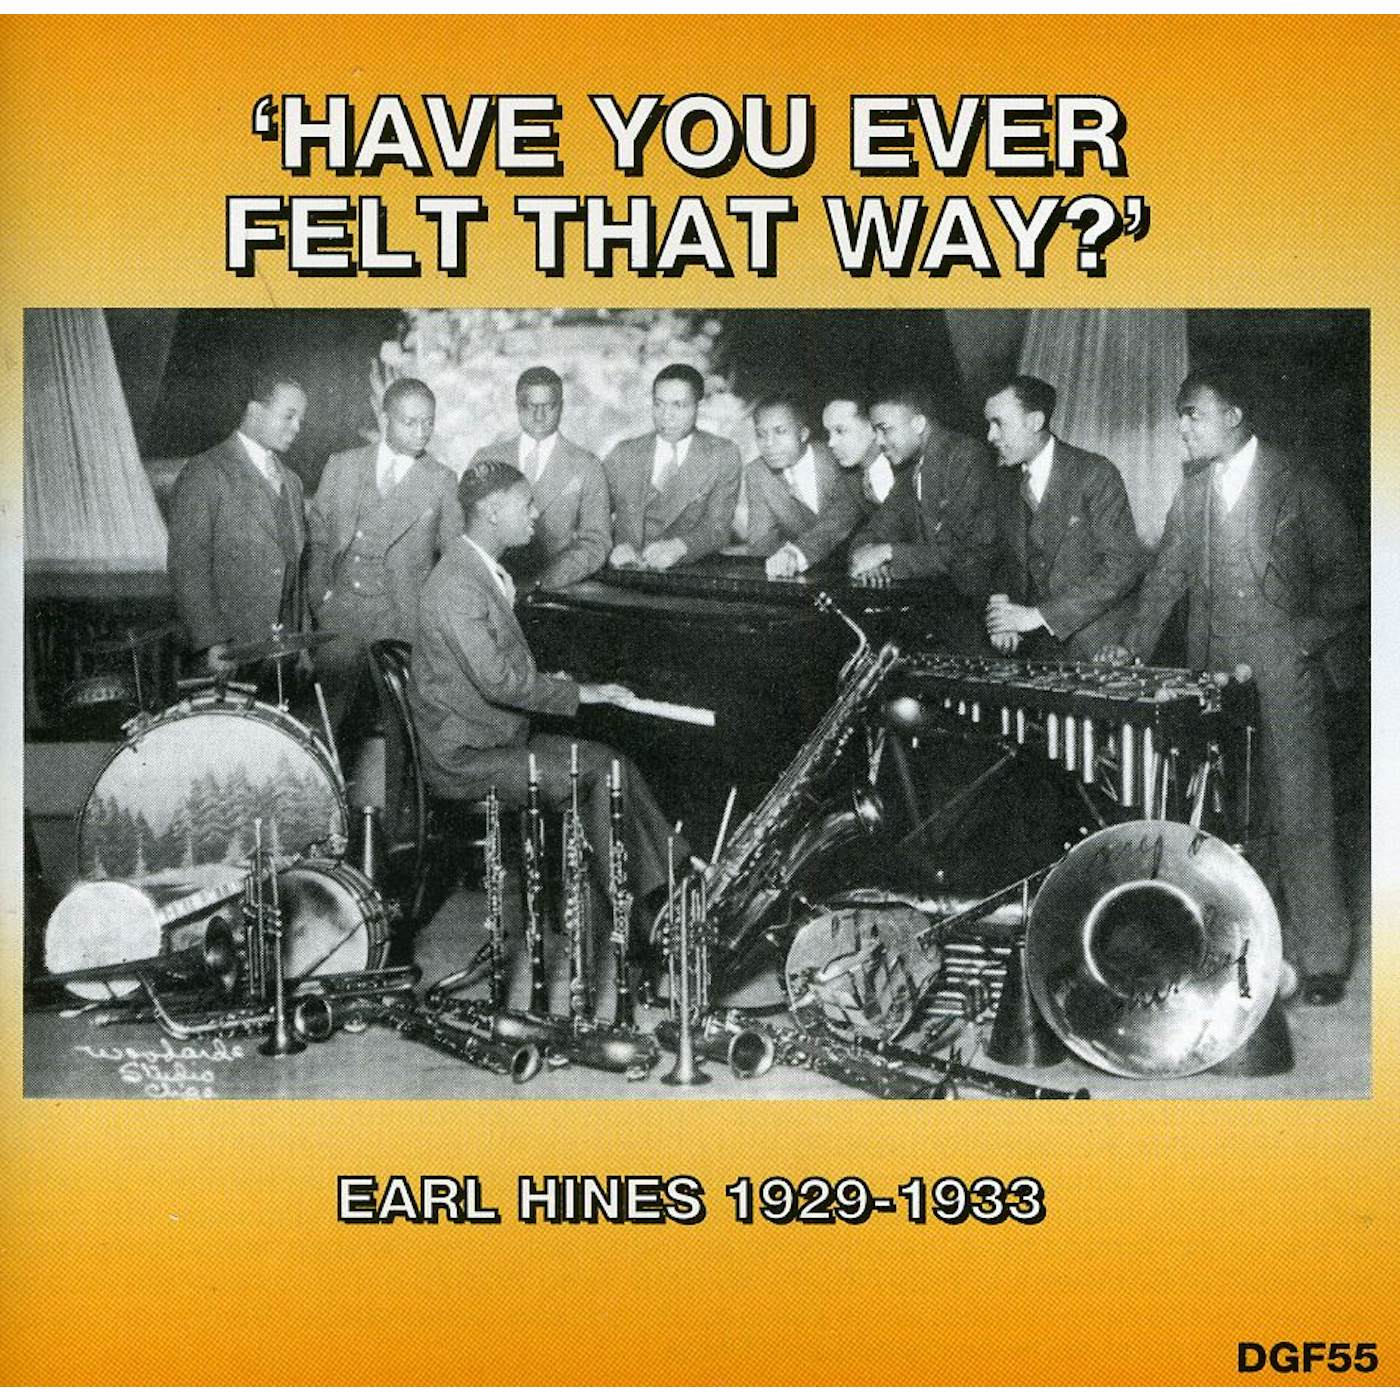 Earl Hines HAVE YOU EVER FELT THAT WAY 1929-1933 CD